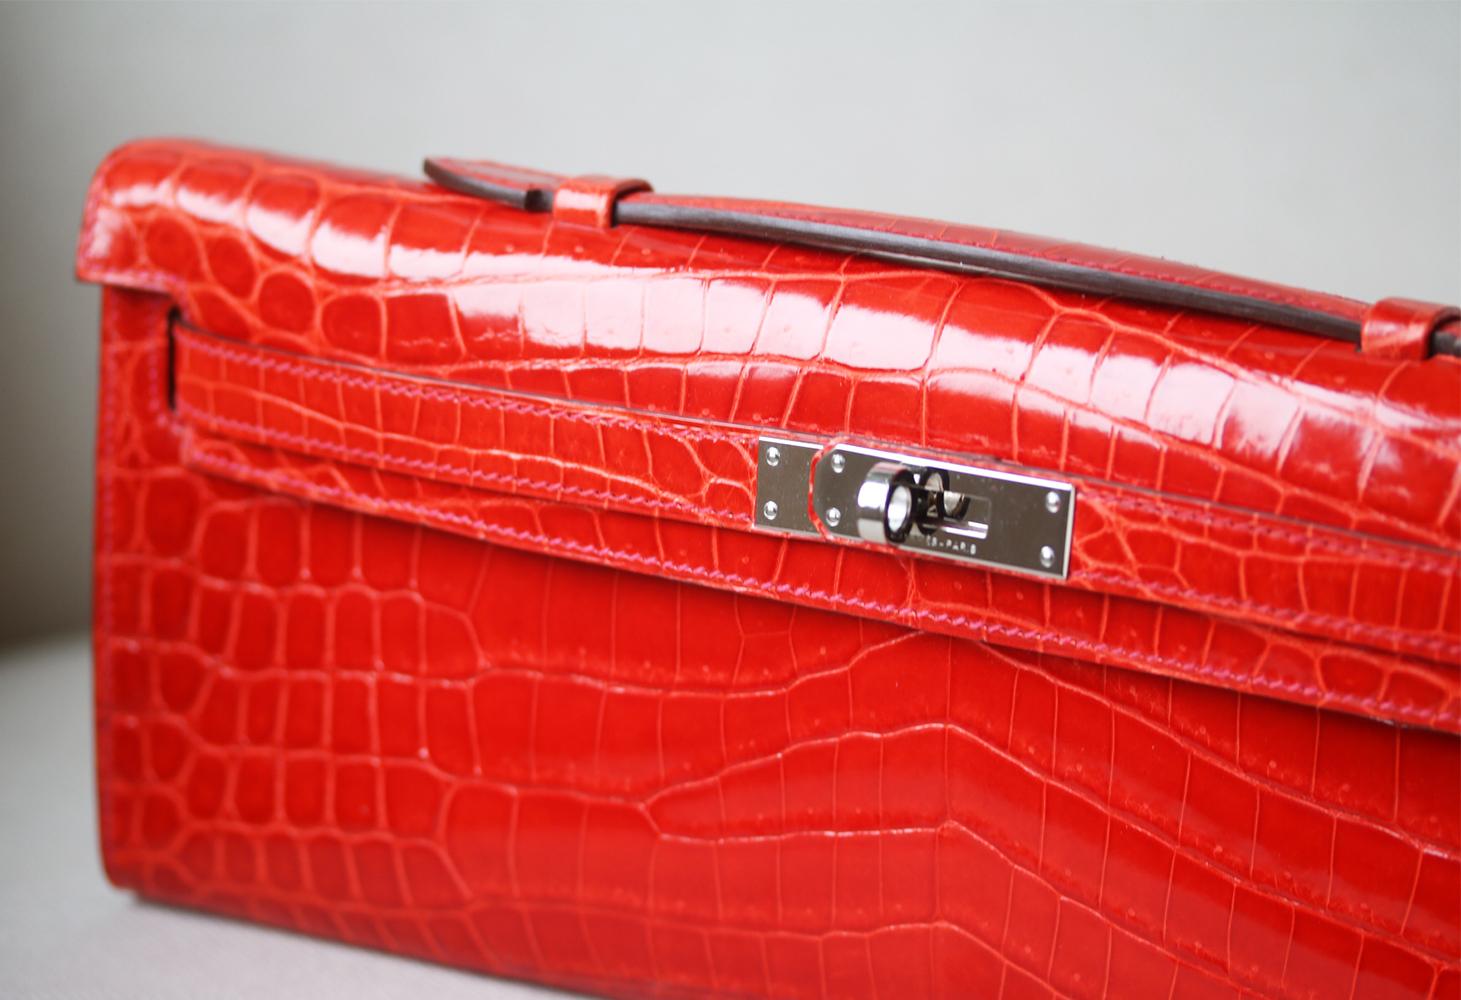 Hermès Kelly Cut Niloticus Crocodile Clutch with palladium hardware. Single flat top handle. Tonal leather lining. Single slit pocket at interior wall. Turn-lock closure at front.  Colour: orange. Does not come with a dustbag or box. 

Dimensions: W